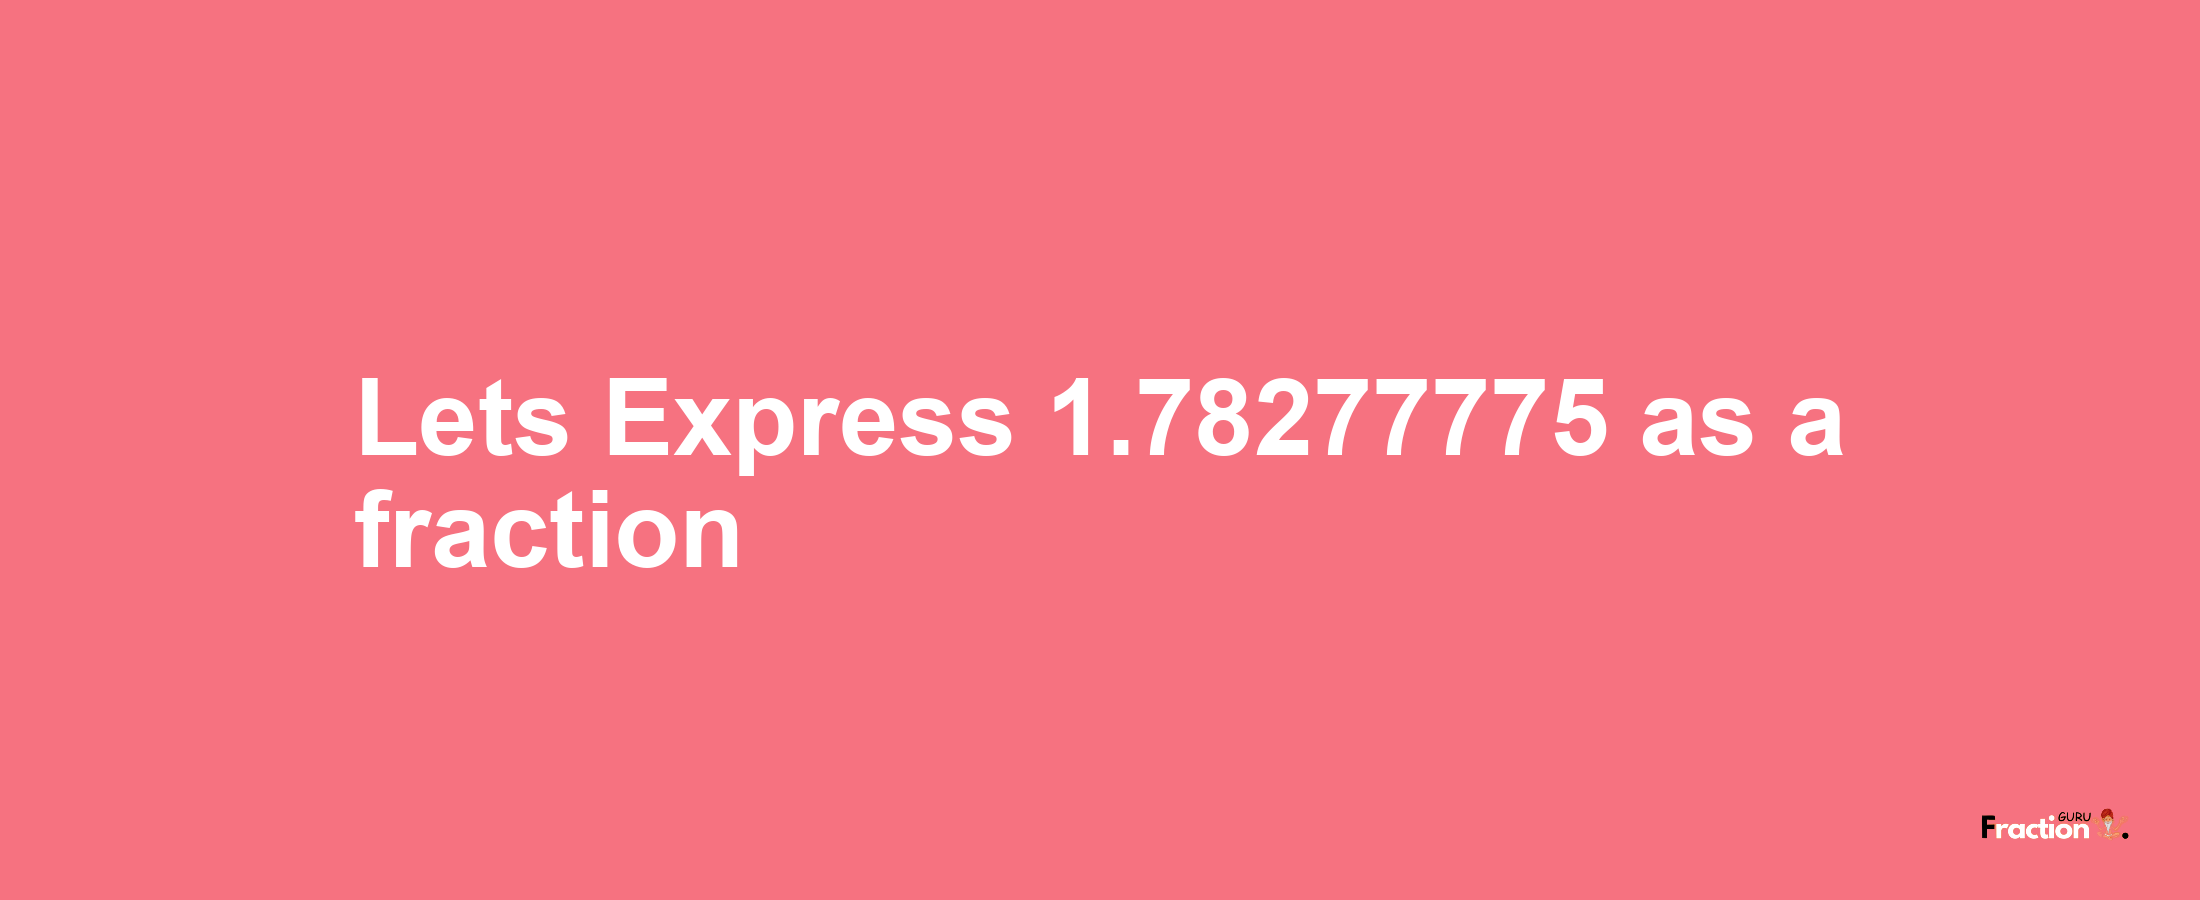 Lets Express 1.78277775 as afraction